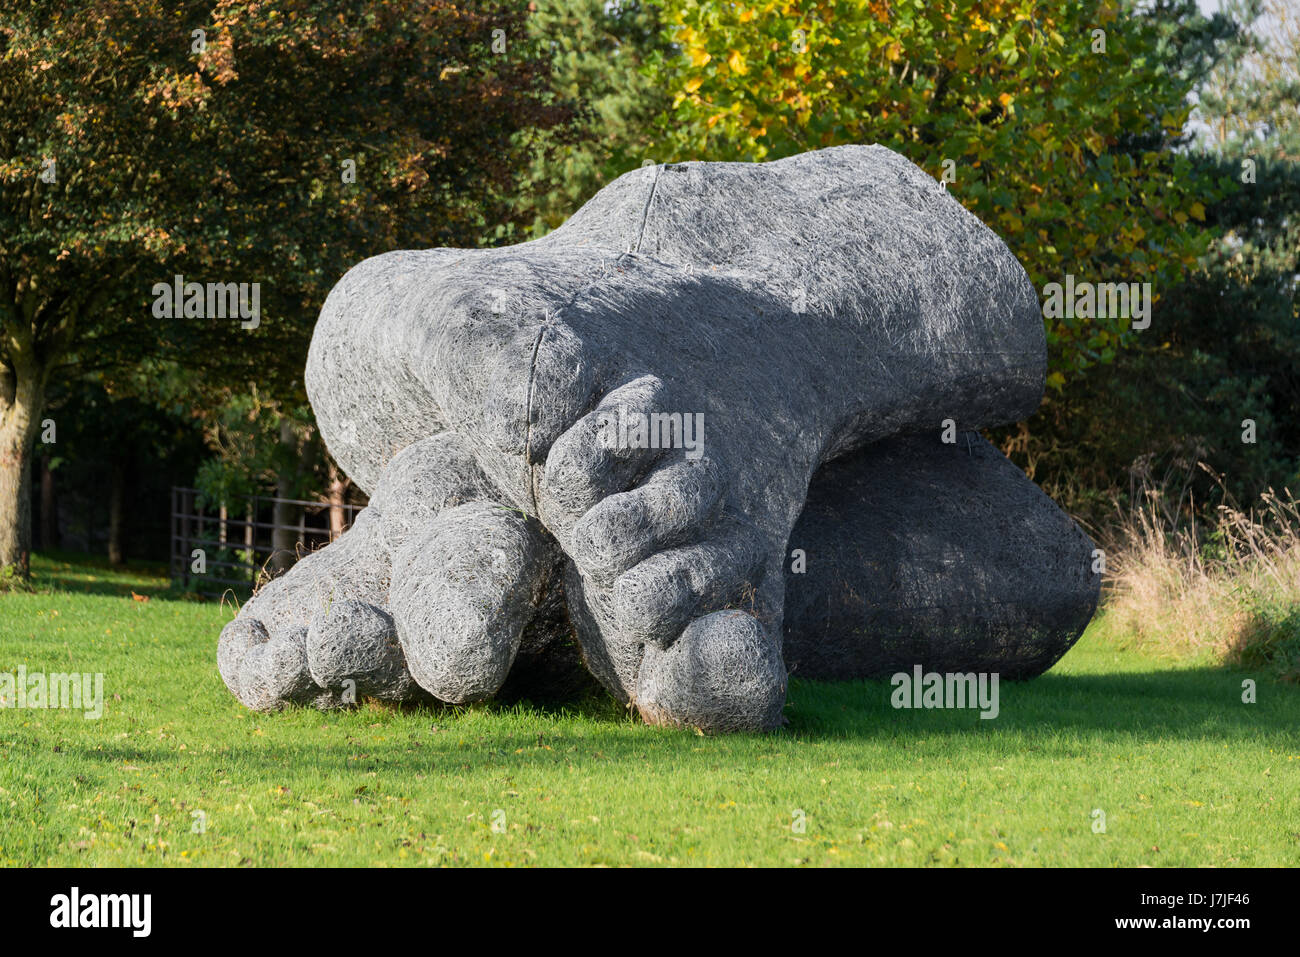 Large pair of feet sculpted by Sophie ryder Stock Photo